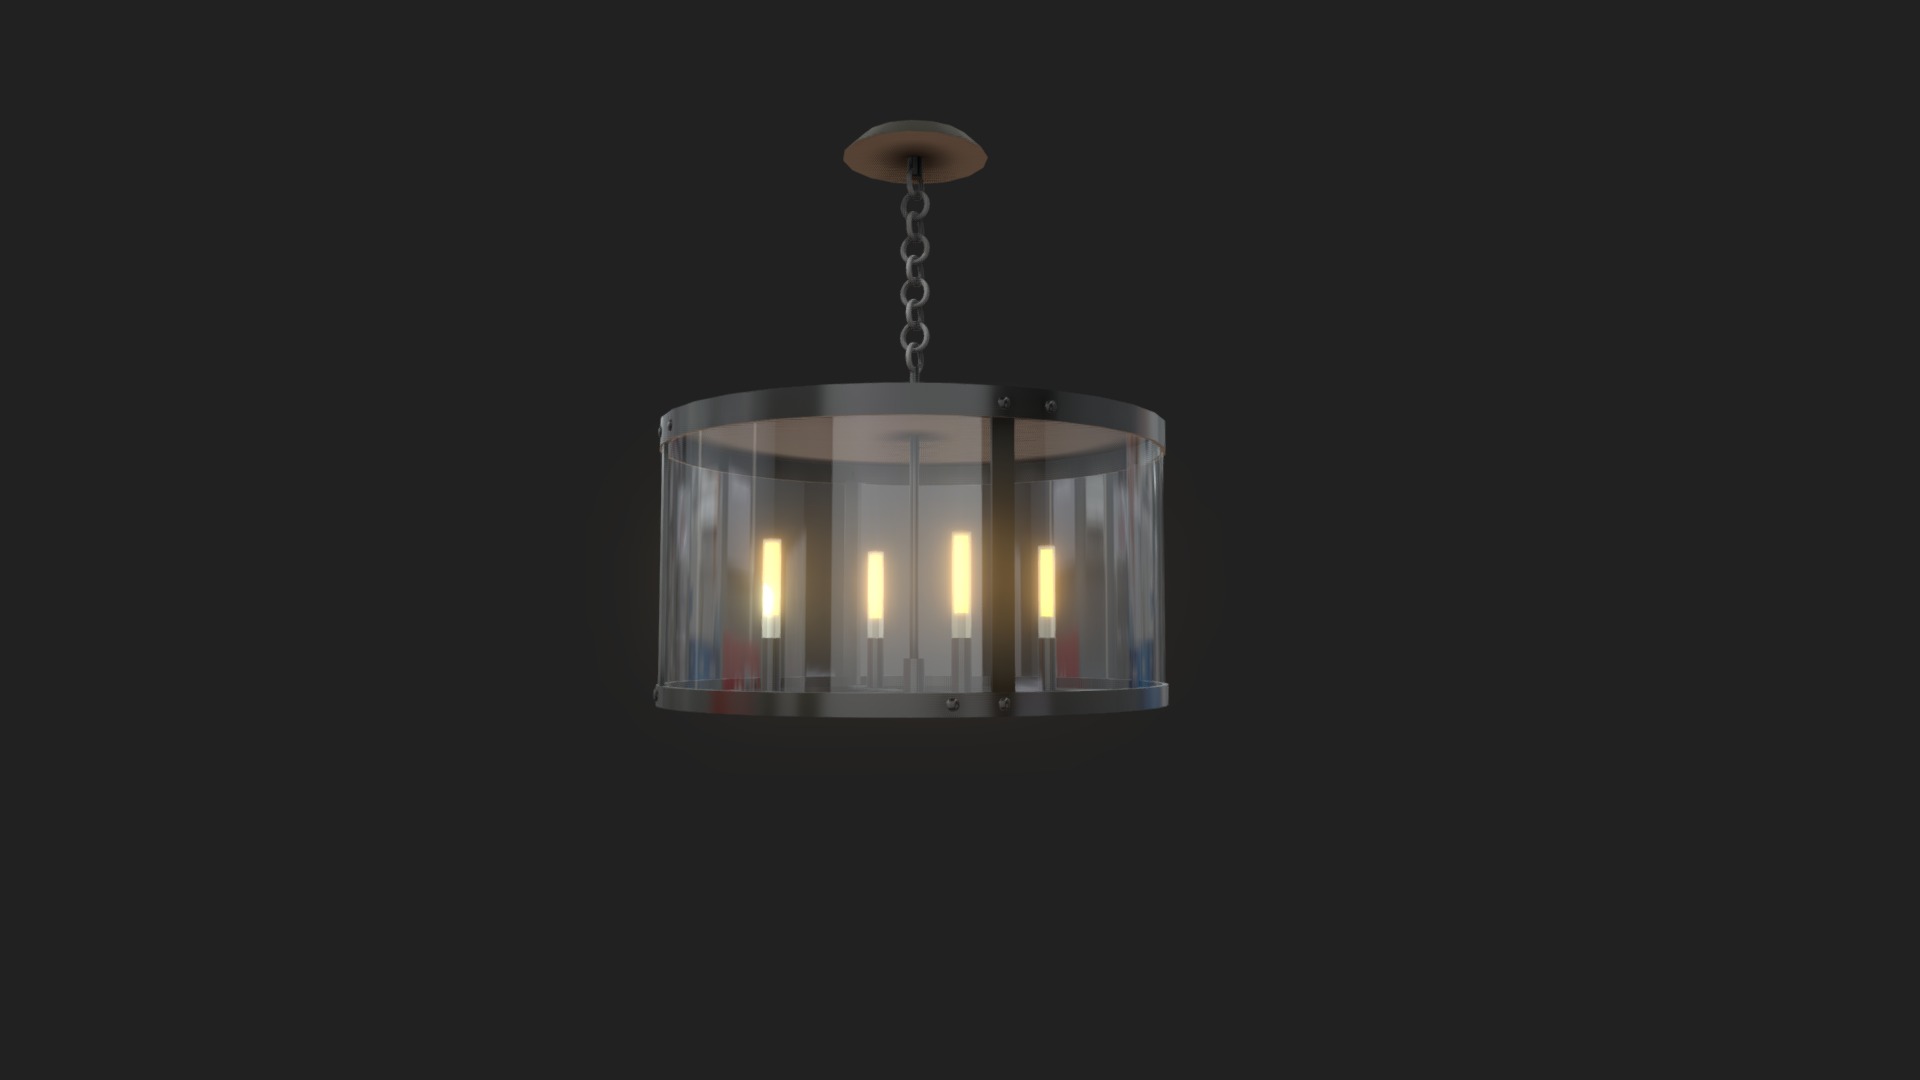 3D model HGPLD99 - This is a 3D model of the HGPLD99. The 3D model is about a light fixture from a ceiling.